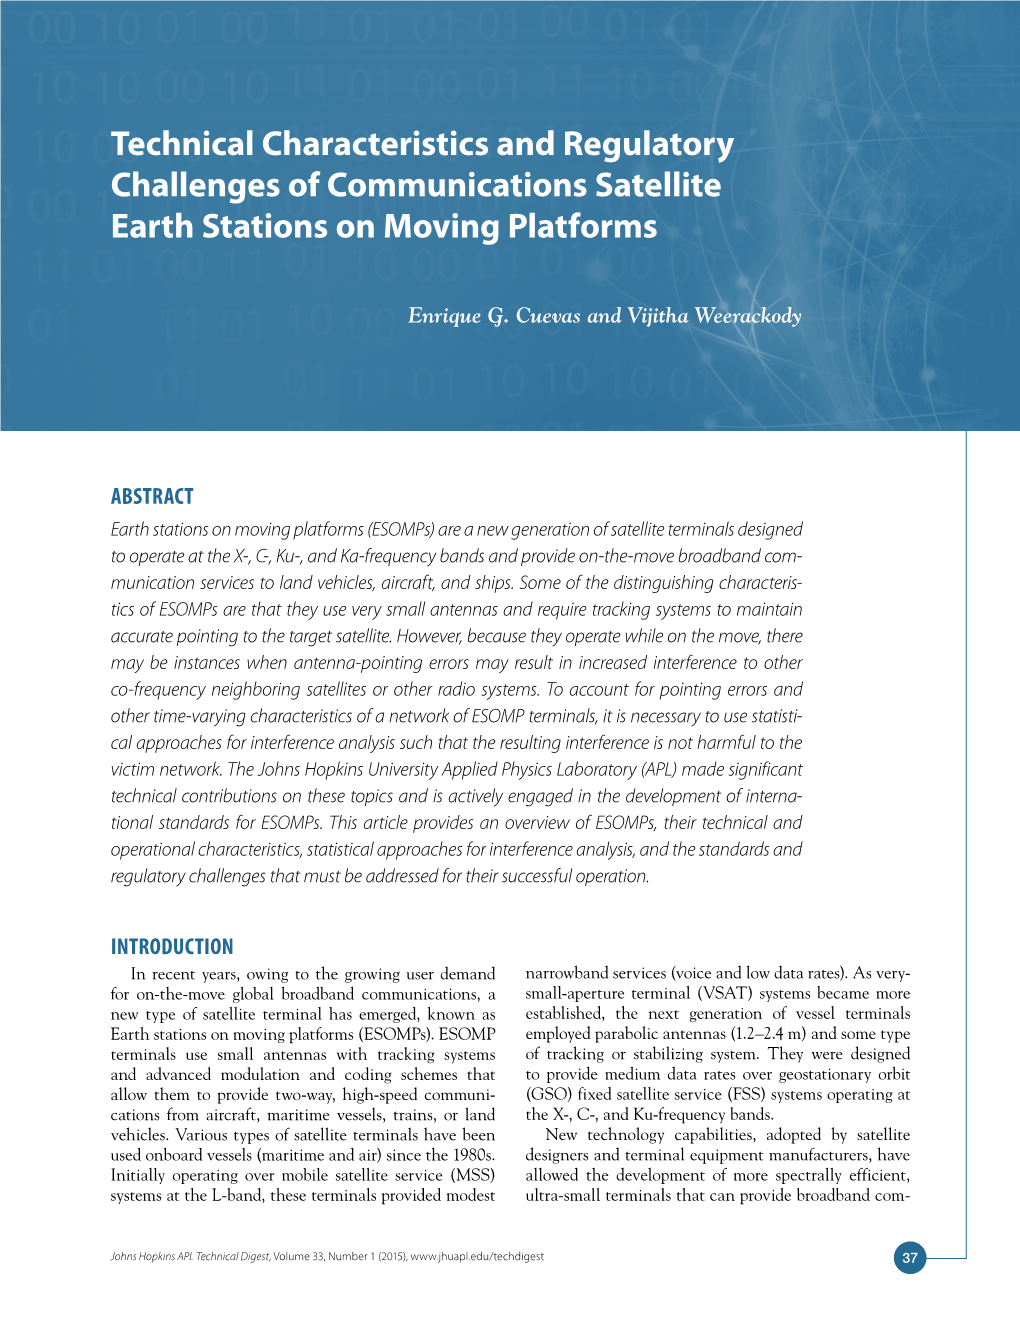 Technical Characteristics and Regulatory Challenges of Communications Satellite Earth Stations on Moving Platforms